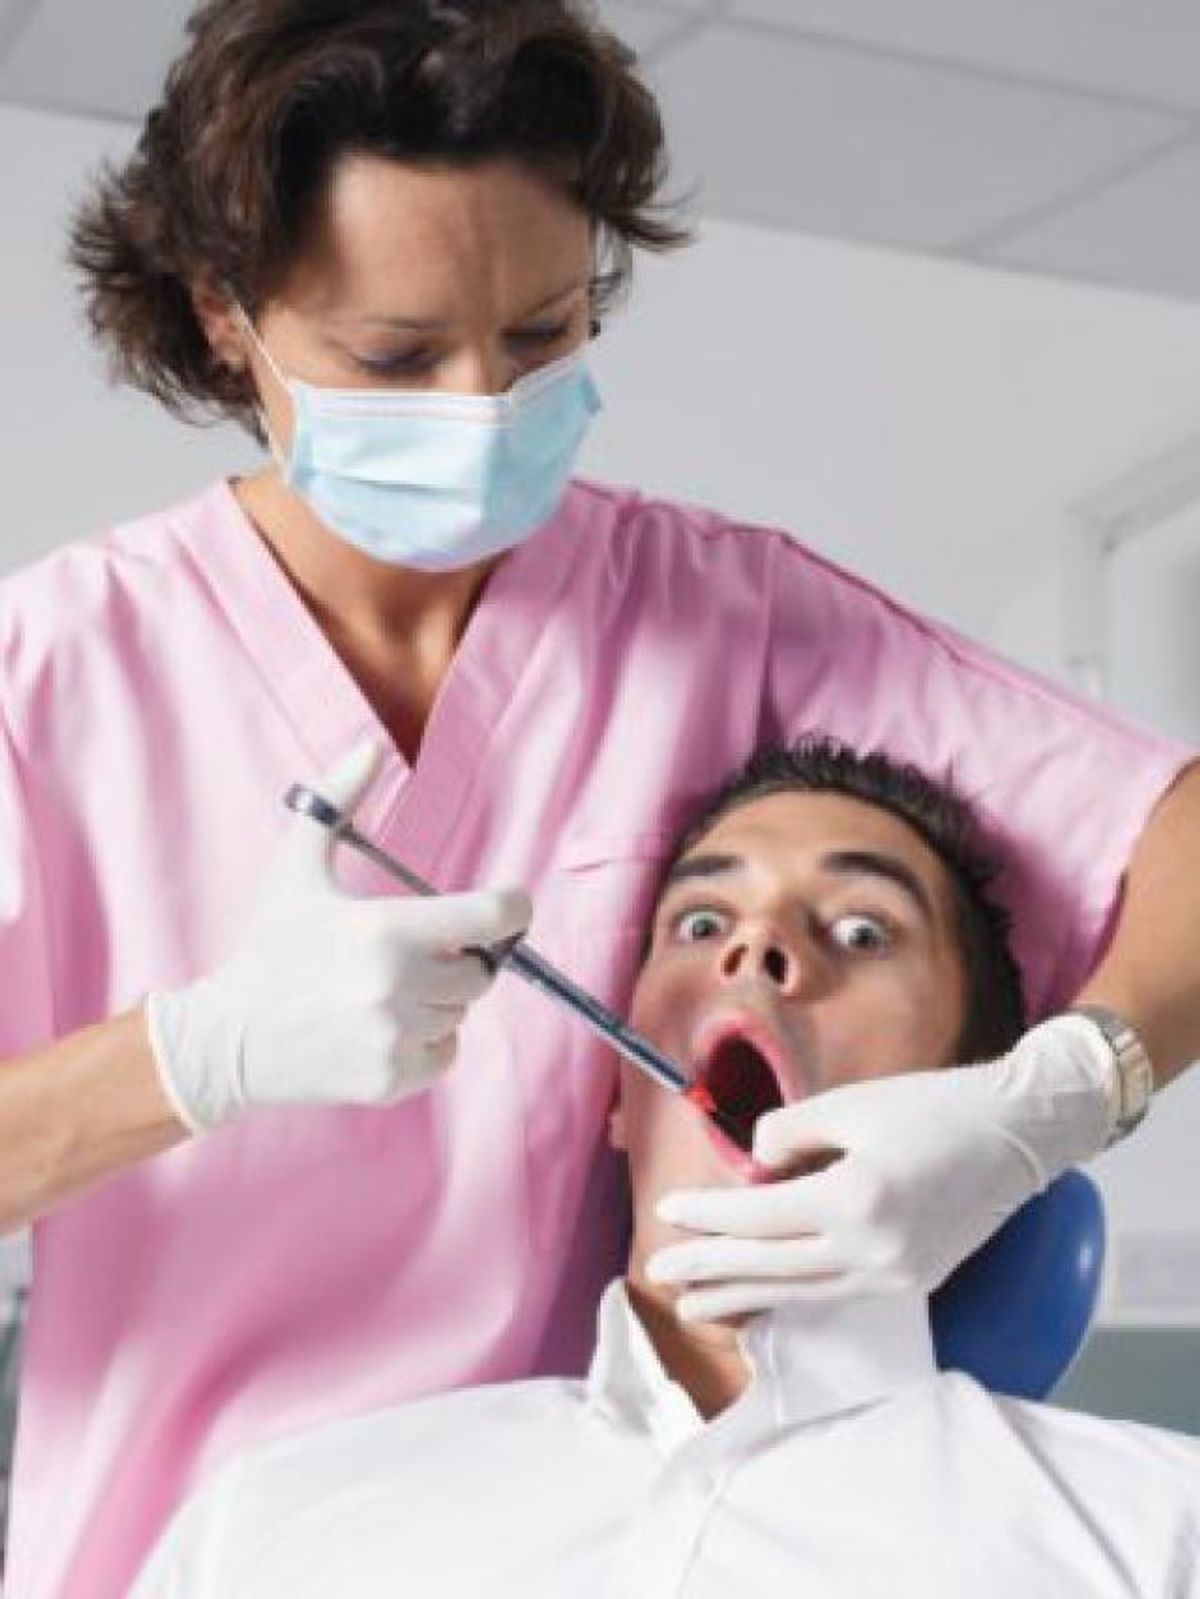 15 Thoughts During A Dentist Appointment